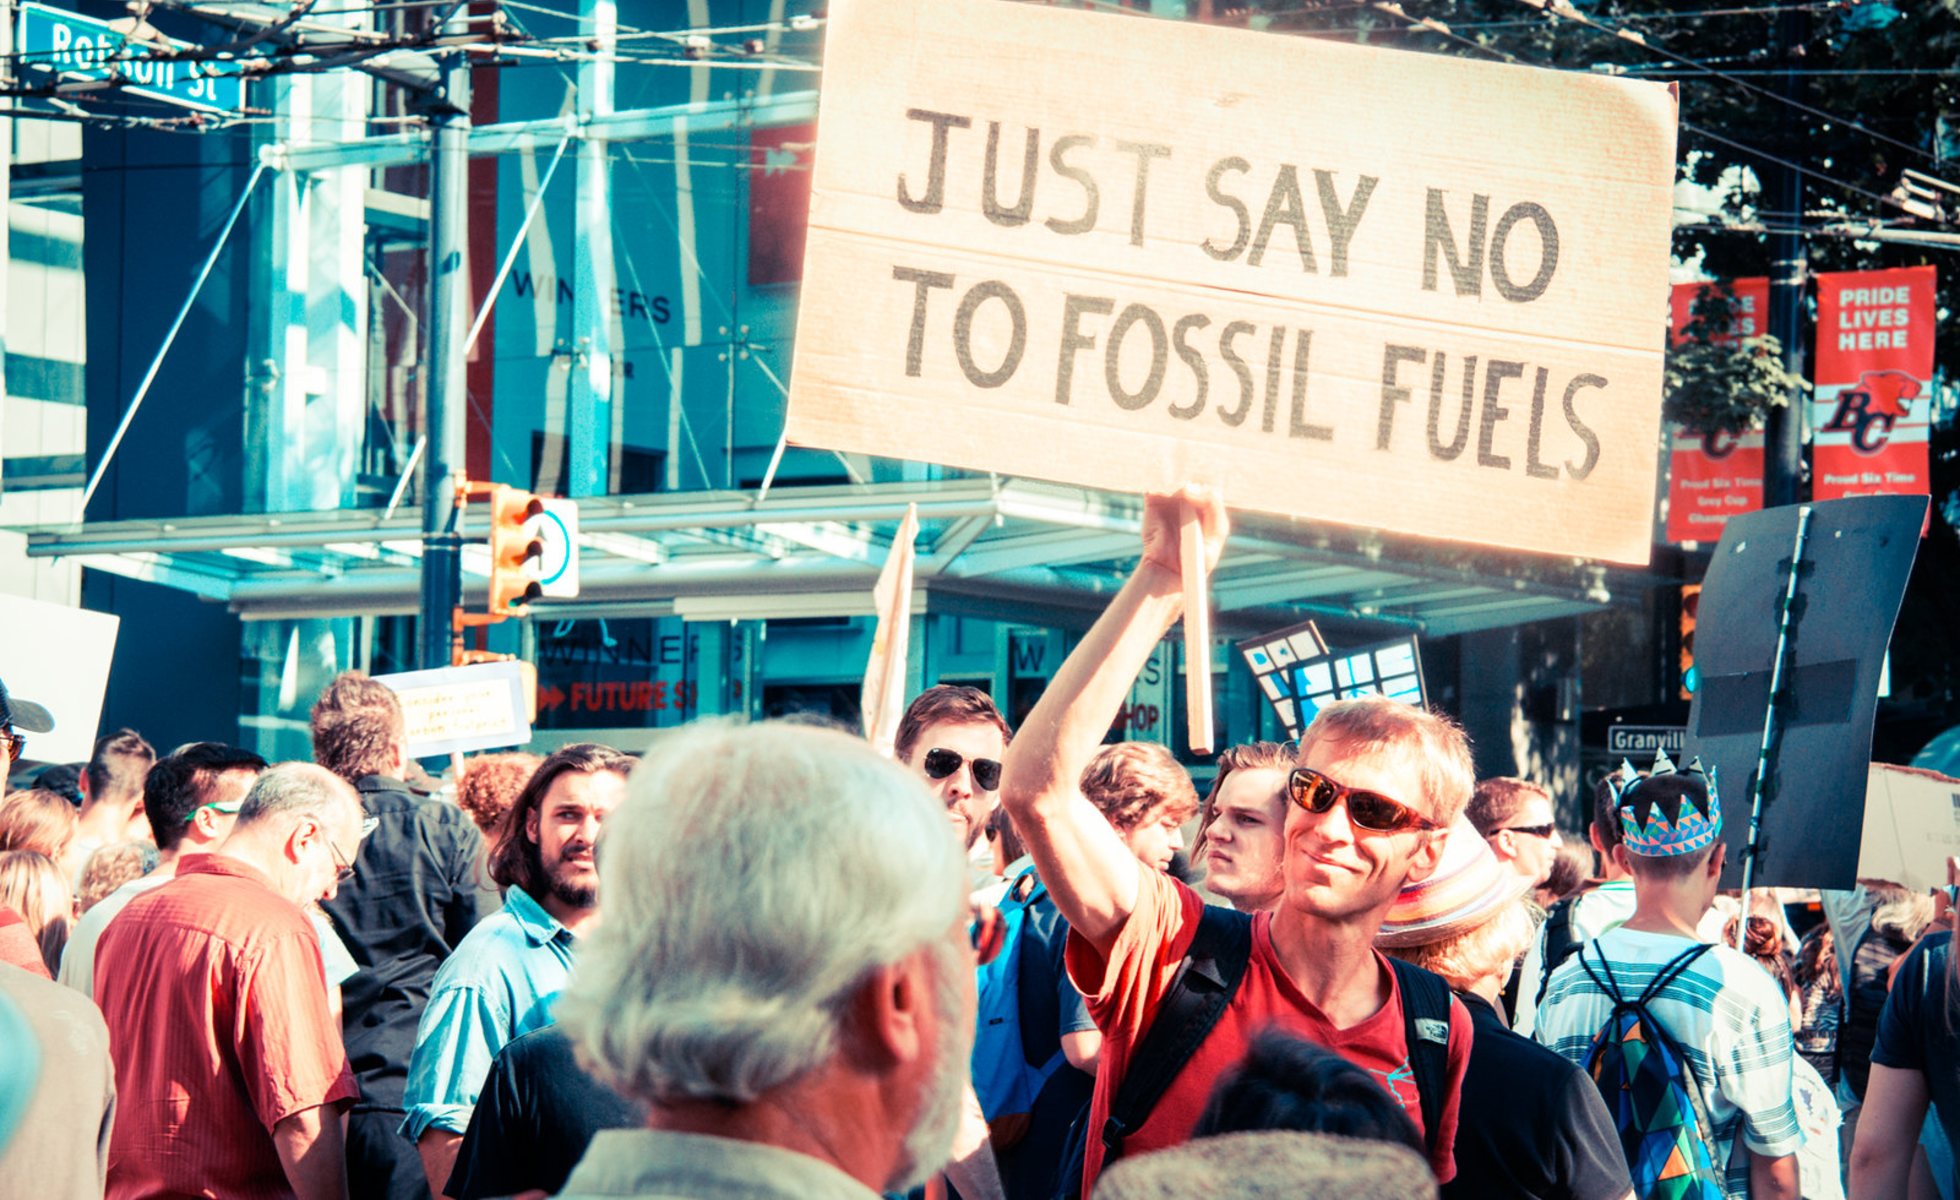 Sign in crowd that reads "Just say no to fossil fuels"